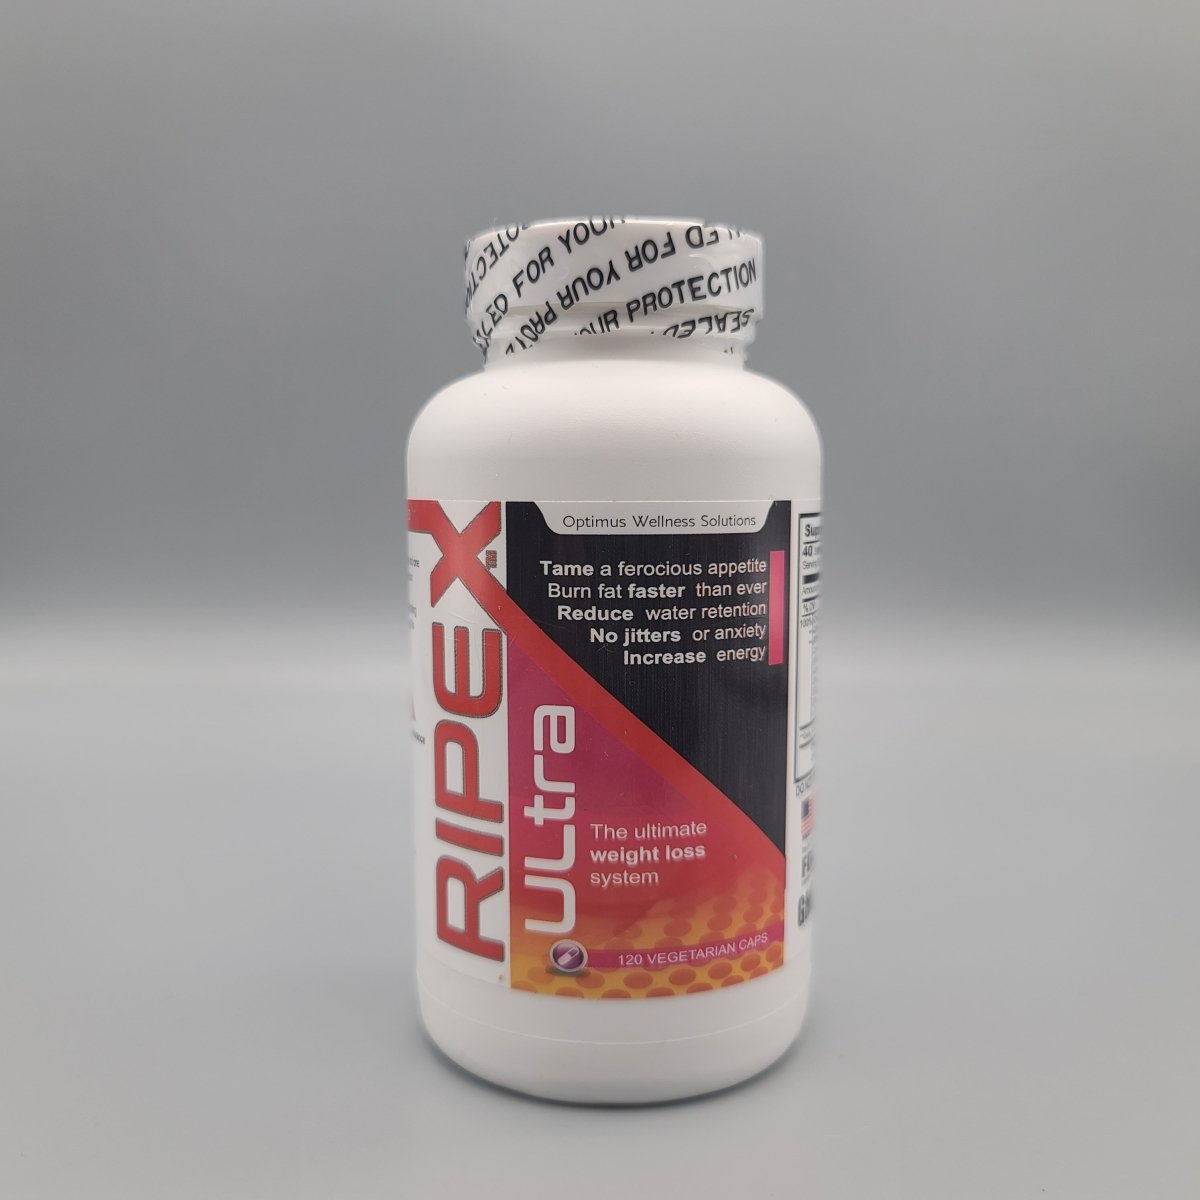 Ripex - Ultra - The Ultimate Weight Loss System - 120 Capsules